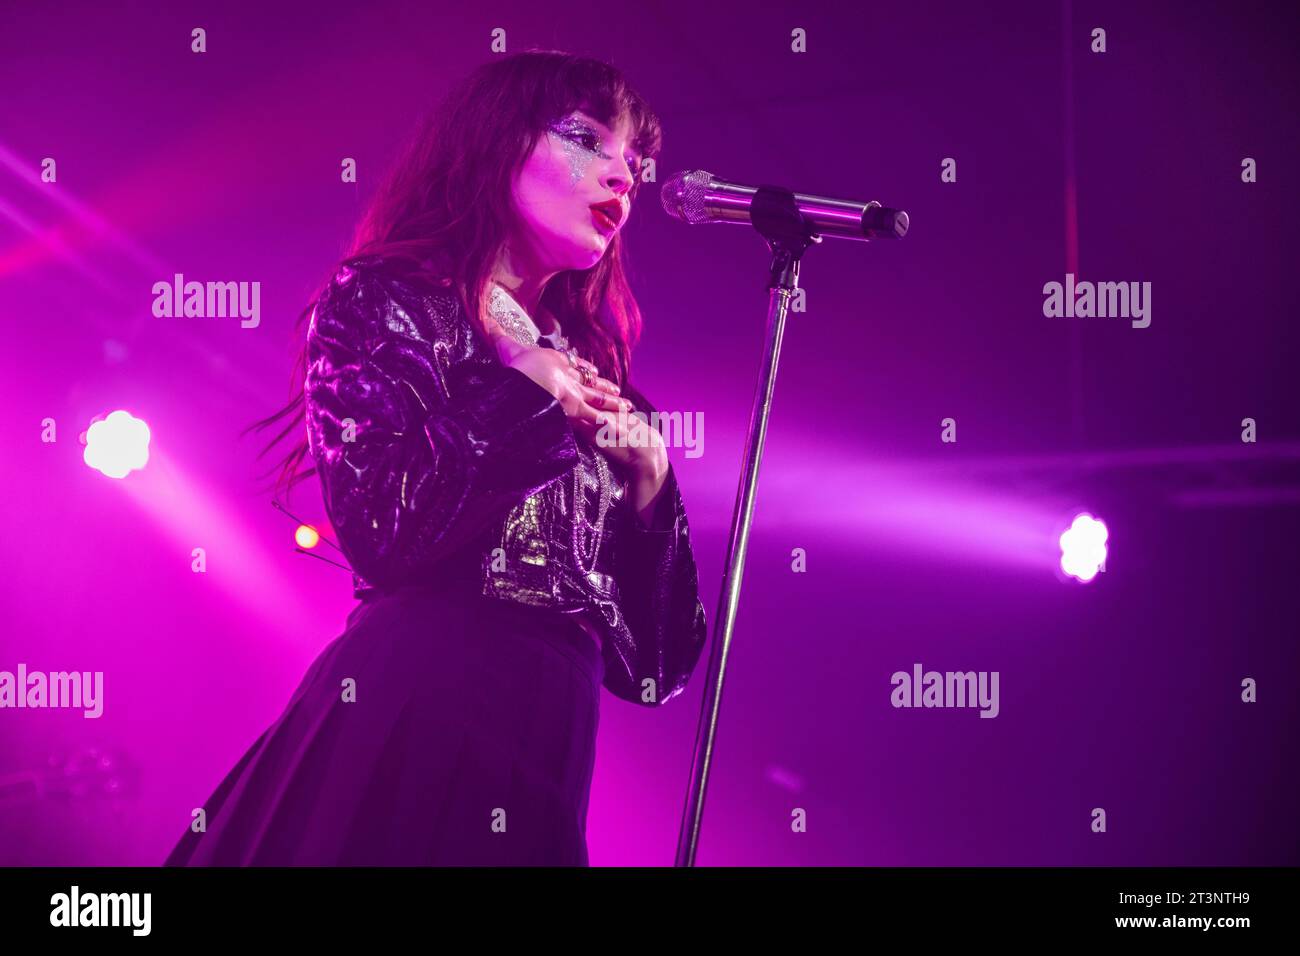 Barcelona, Spain. 2023.10.24. Lauren Mayberry singer perform on stage at La Nau on October 24, 2023 in Barcelona, Spain. Stock Photo